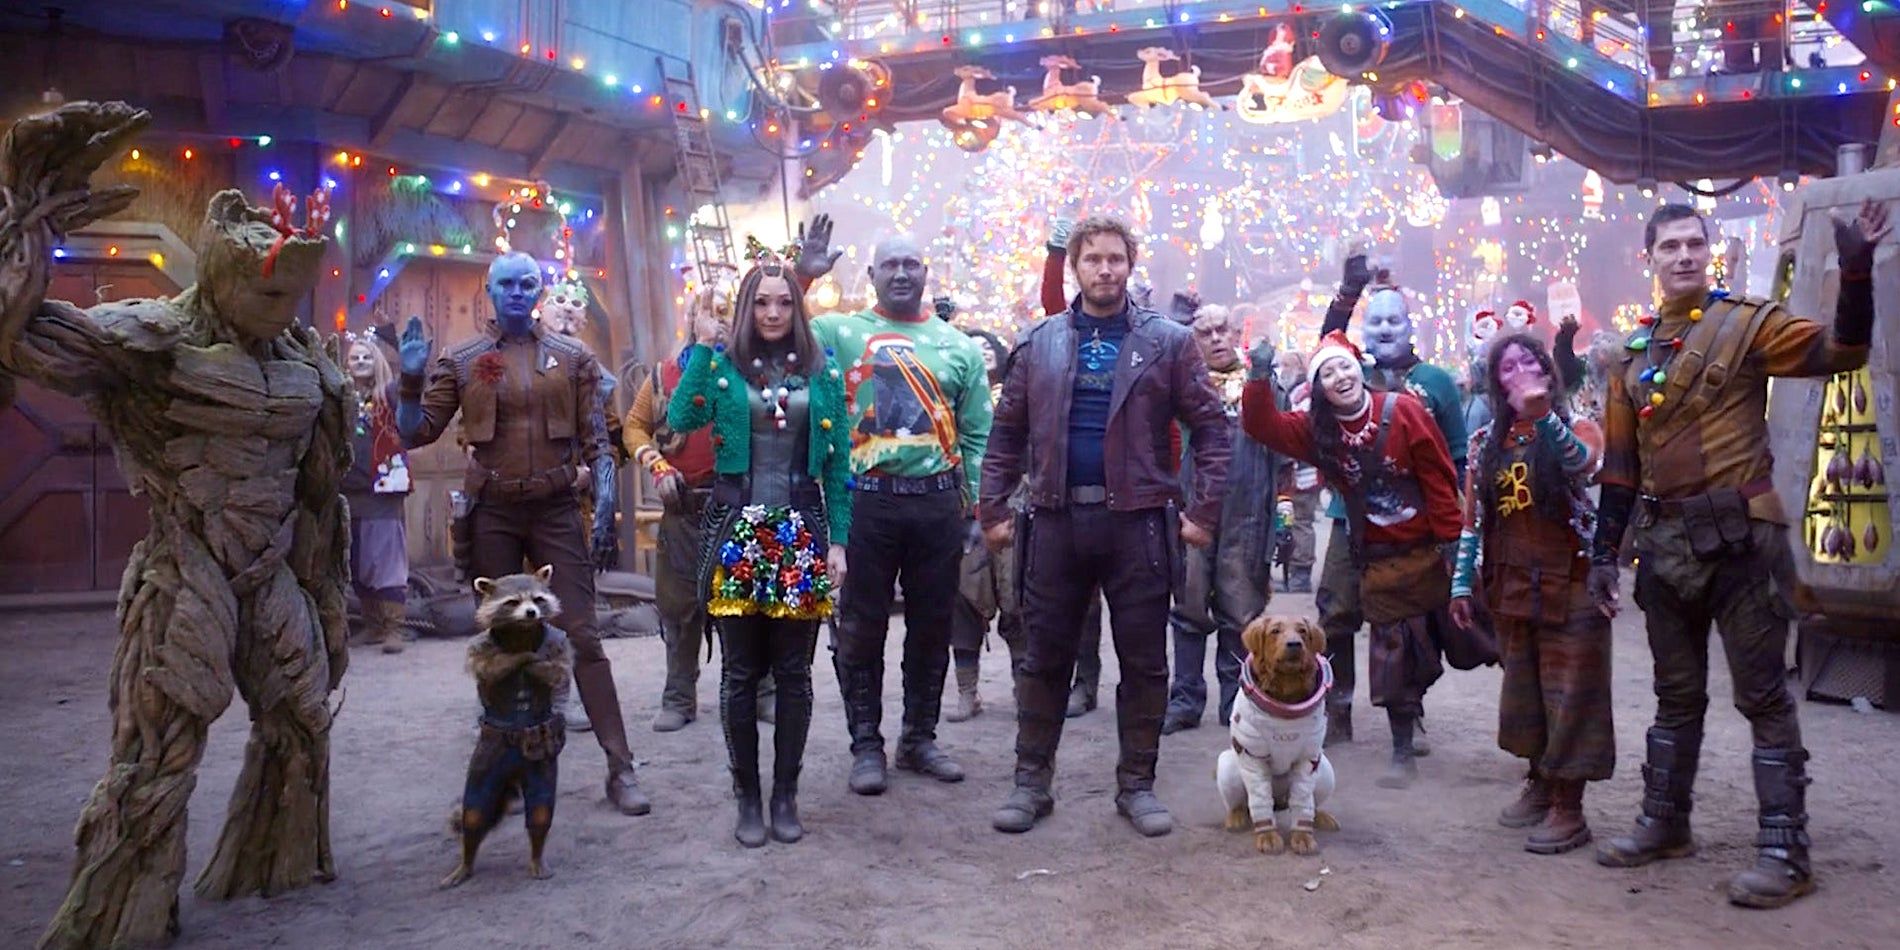 Guardians of the Galaxy Holiday Special cast including Stephen Blackehart on the right